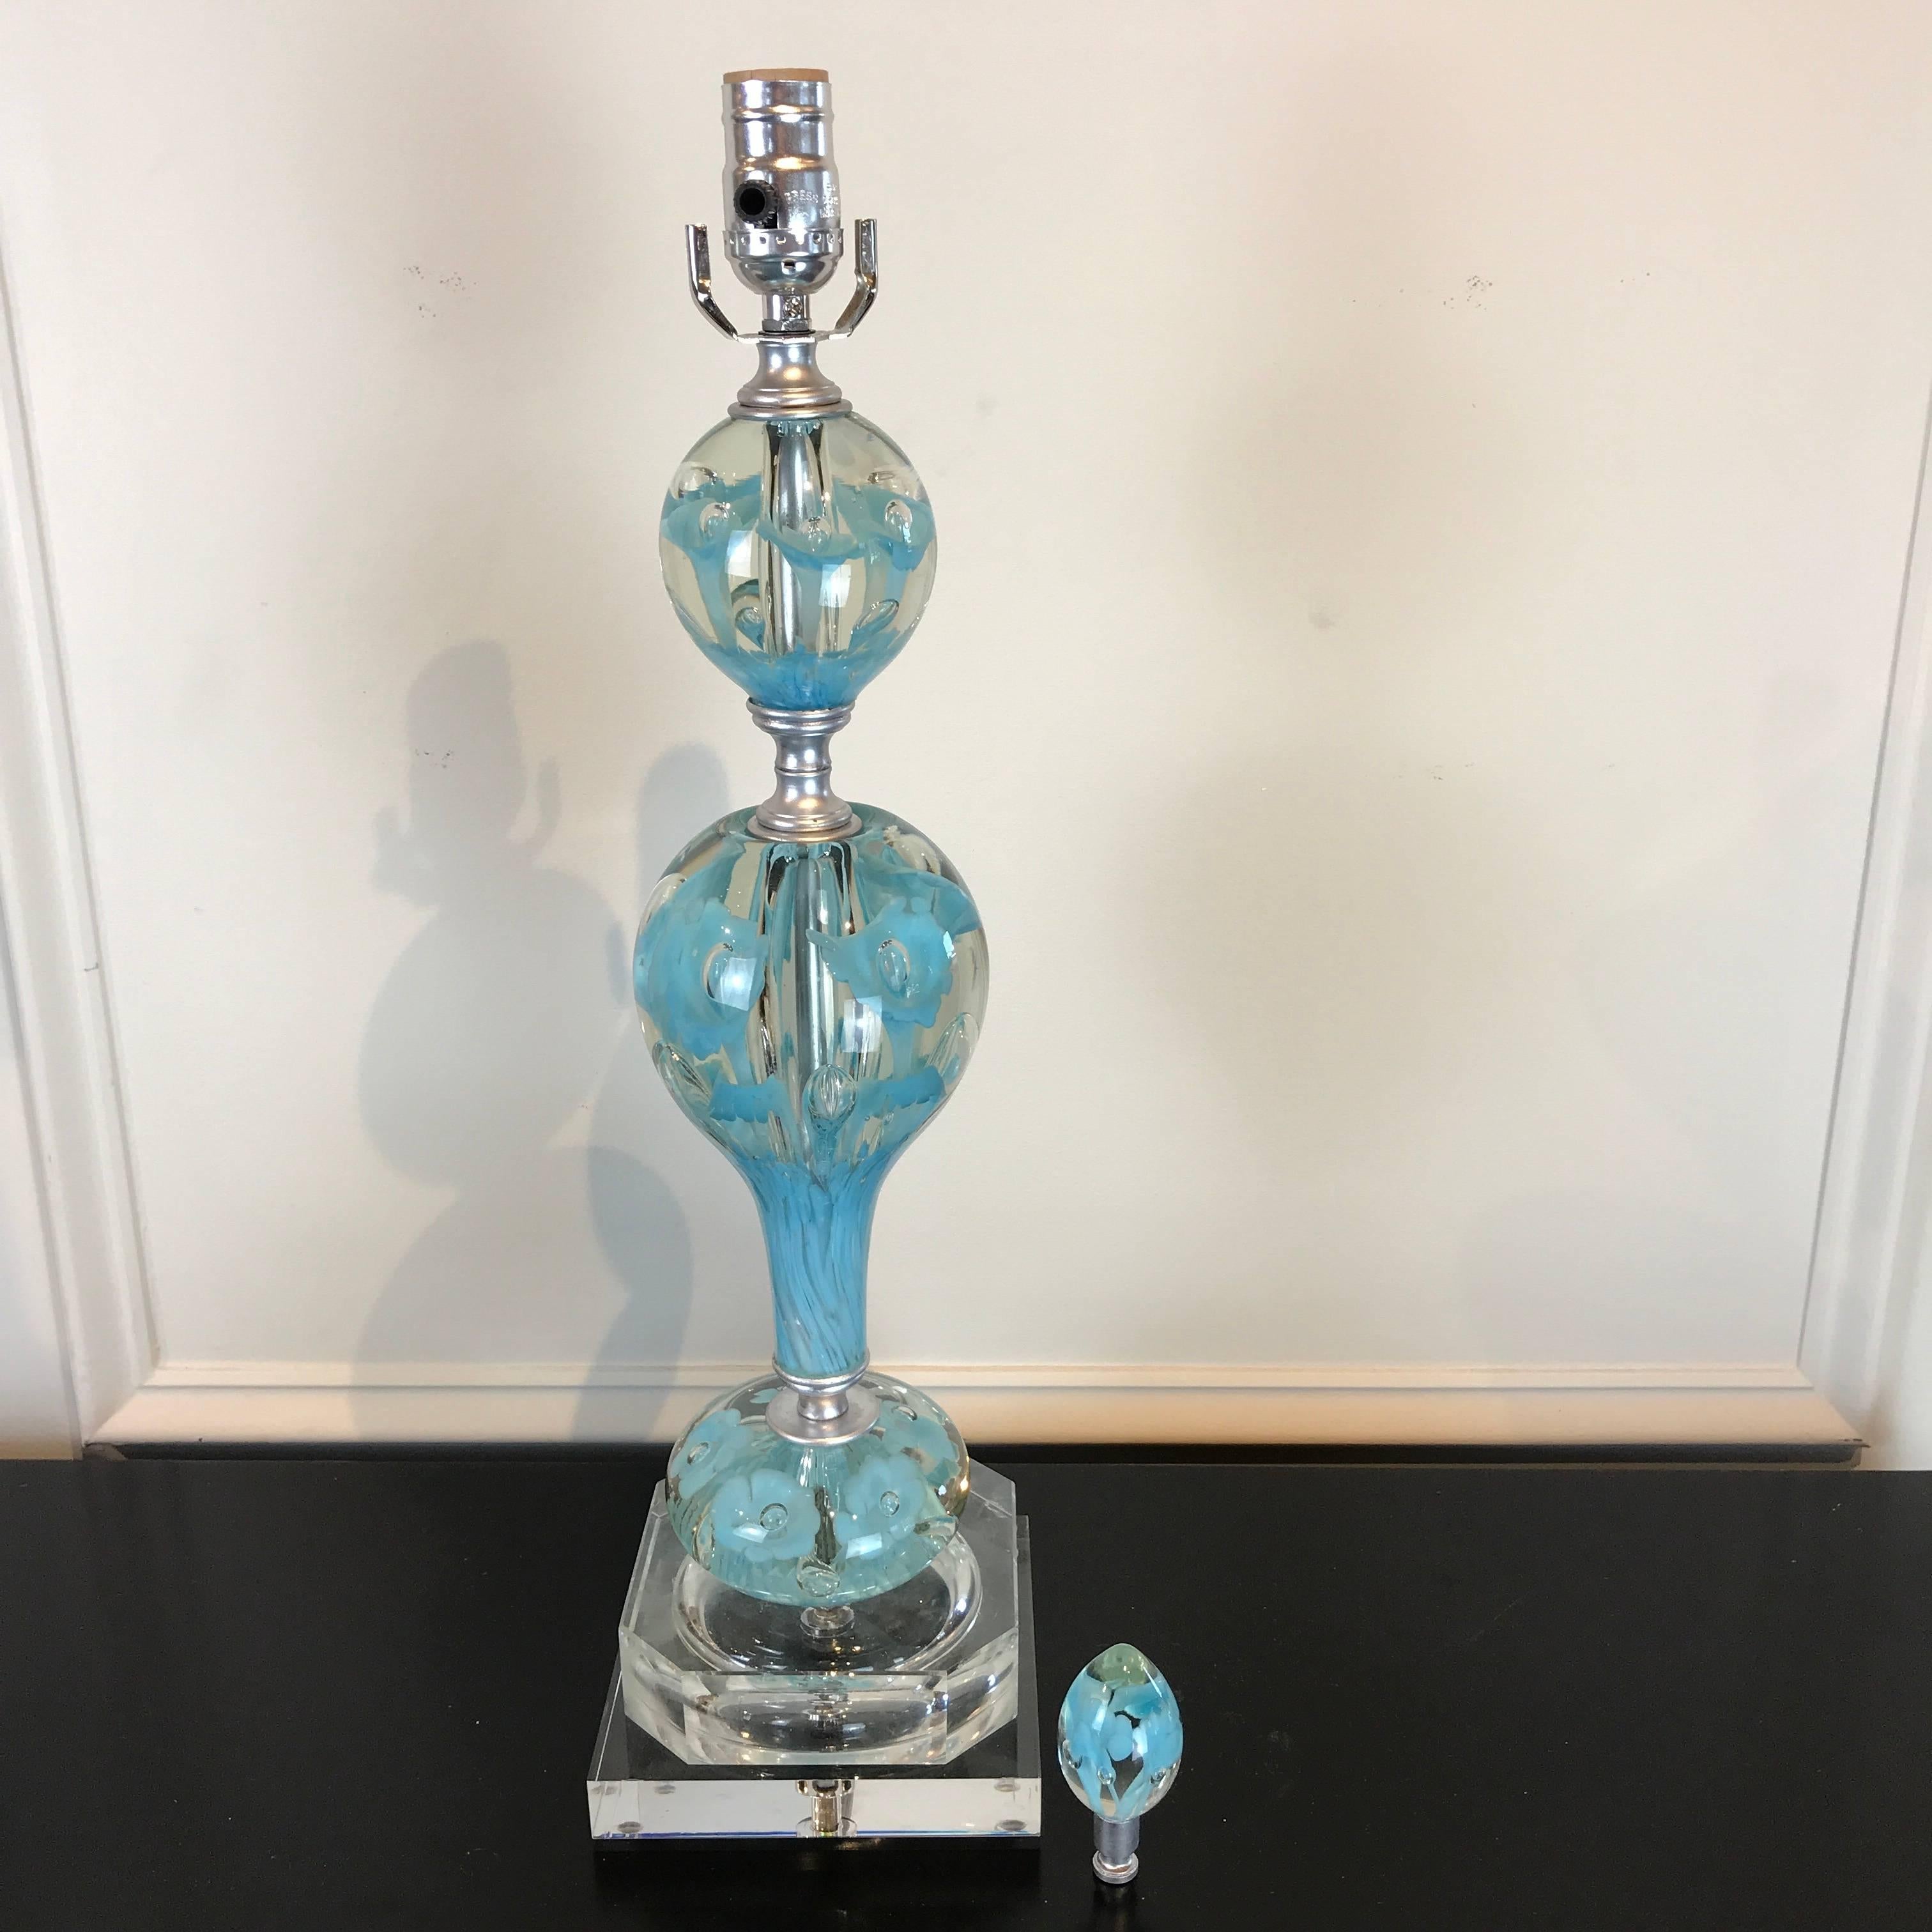 Midcentury Murano Style Glass and Brass Lamps in Turquoise For Sale 4